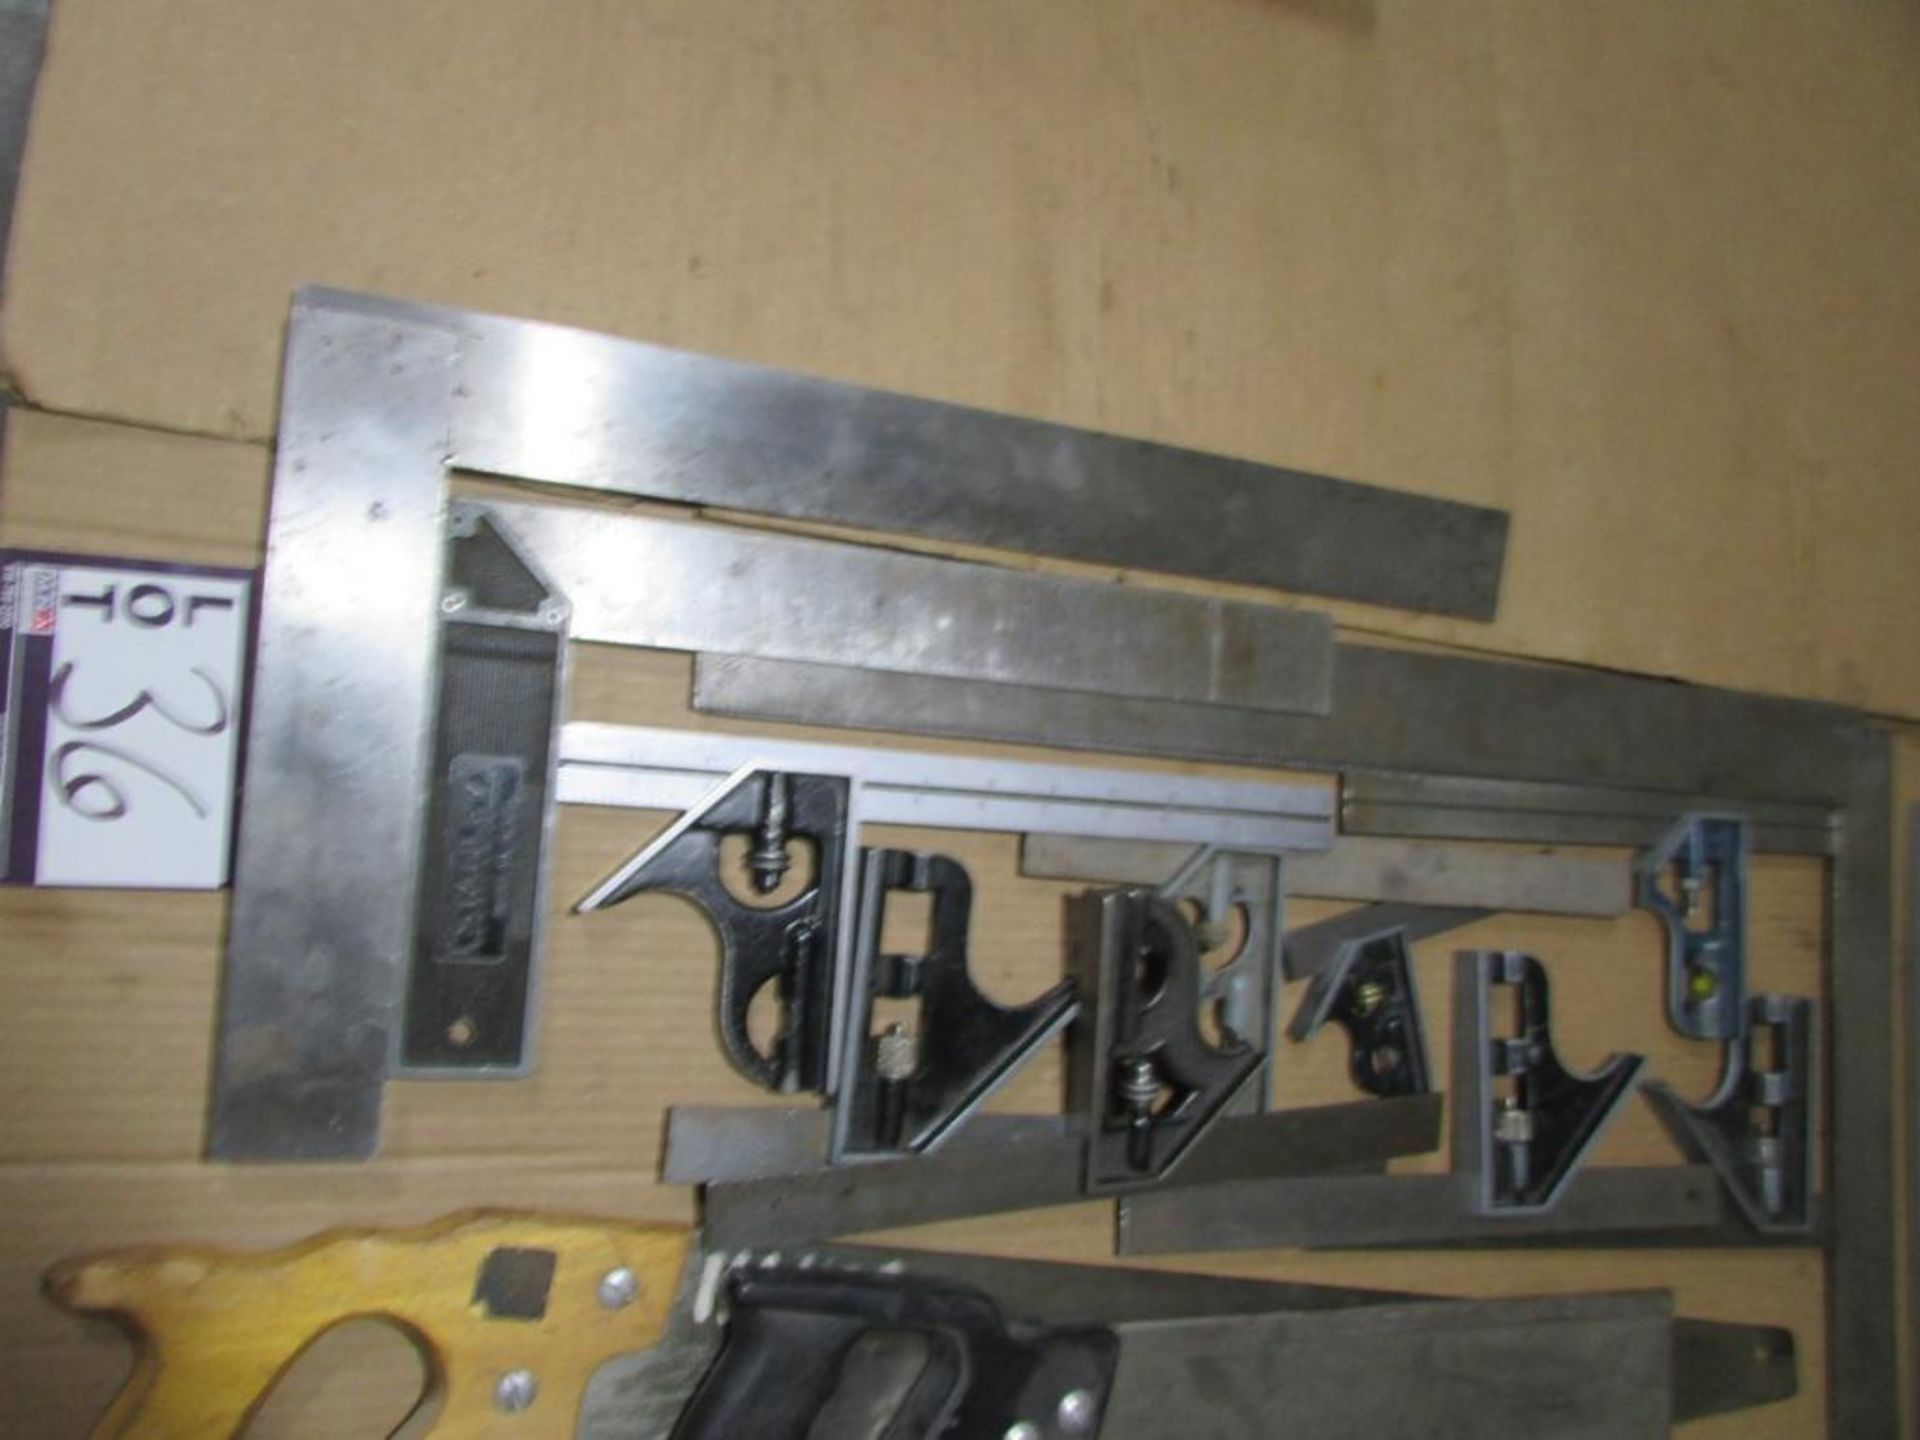 Assorted Hand Tools: Ruler, leveler, Squares, Saws, Compression tool, Adjustable Wrenches, and Pipe - Image 3 of 5